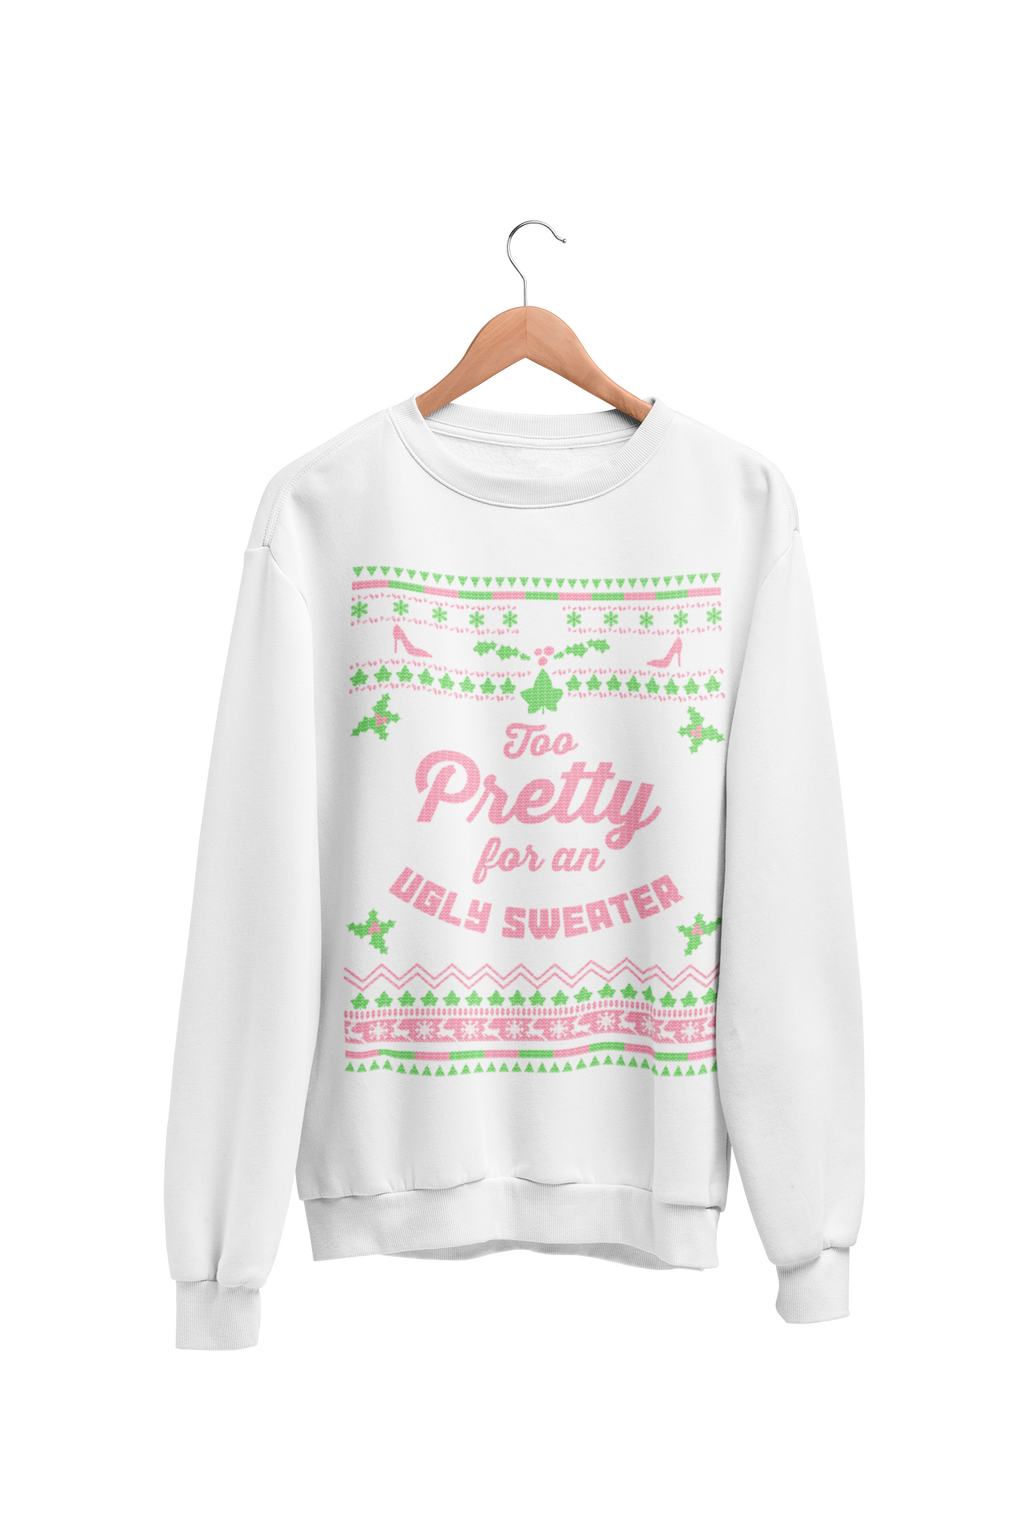 Too Pretty for an Ugly Sweater